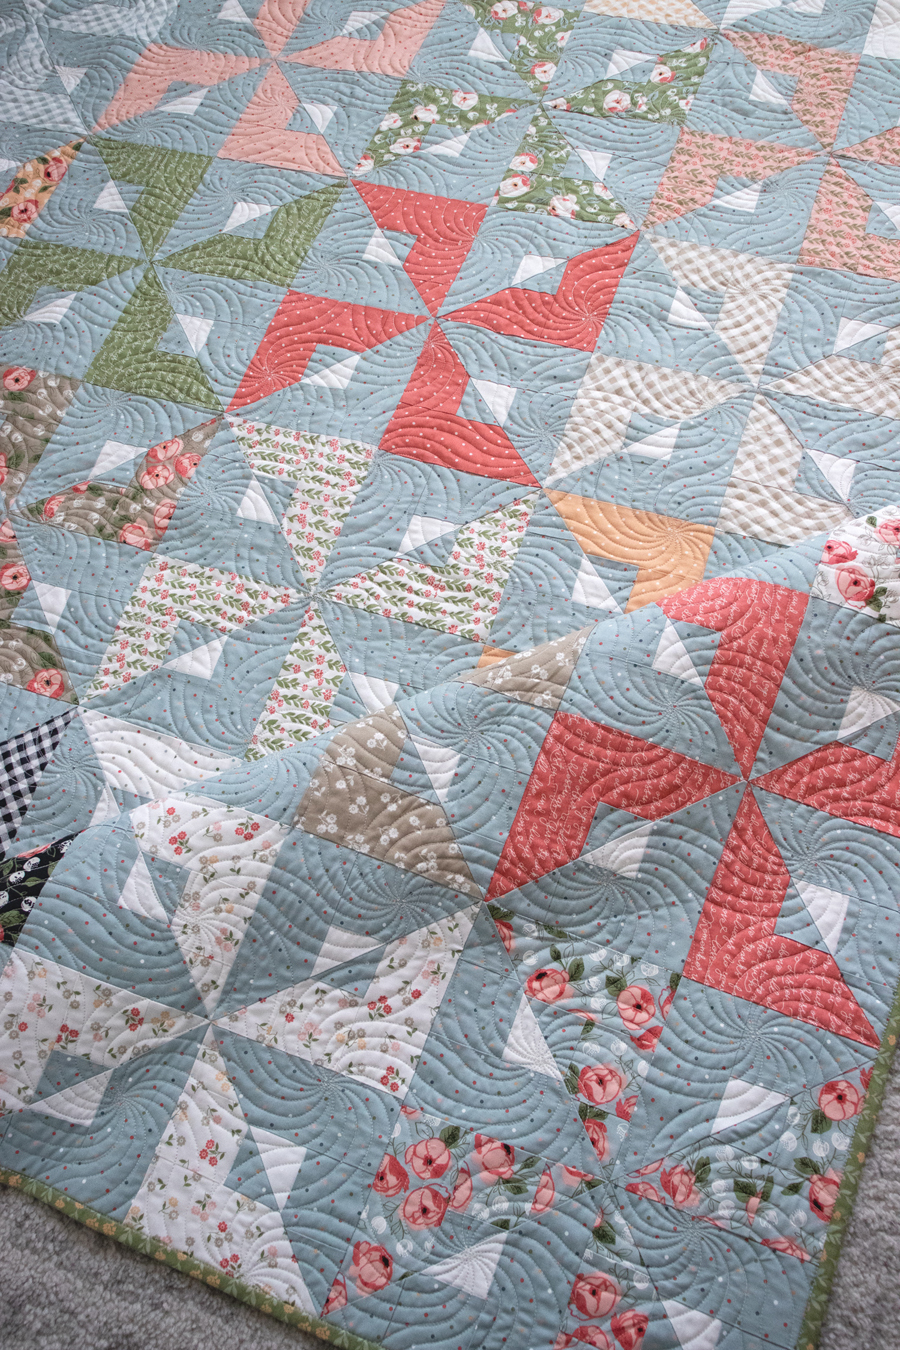 Busybody pinwheel quilt by Vanessa Goertzen of Lella Boutique. Make it with a Layer Cake or Jelly Roll. Fabric is Country Rose by Lella Boutique for Moda Fabrics.